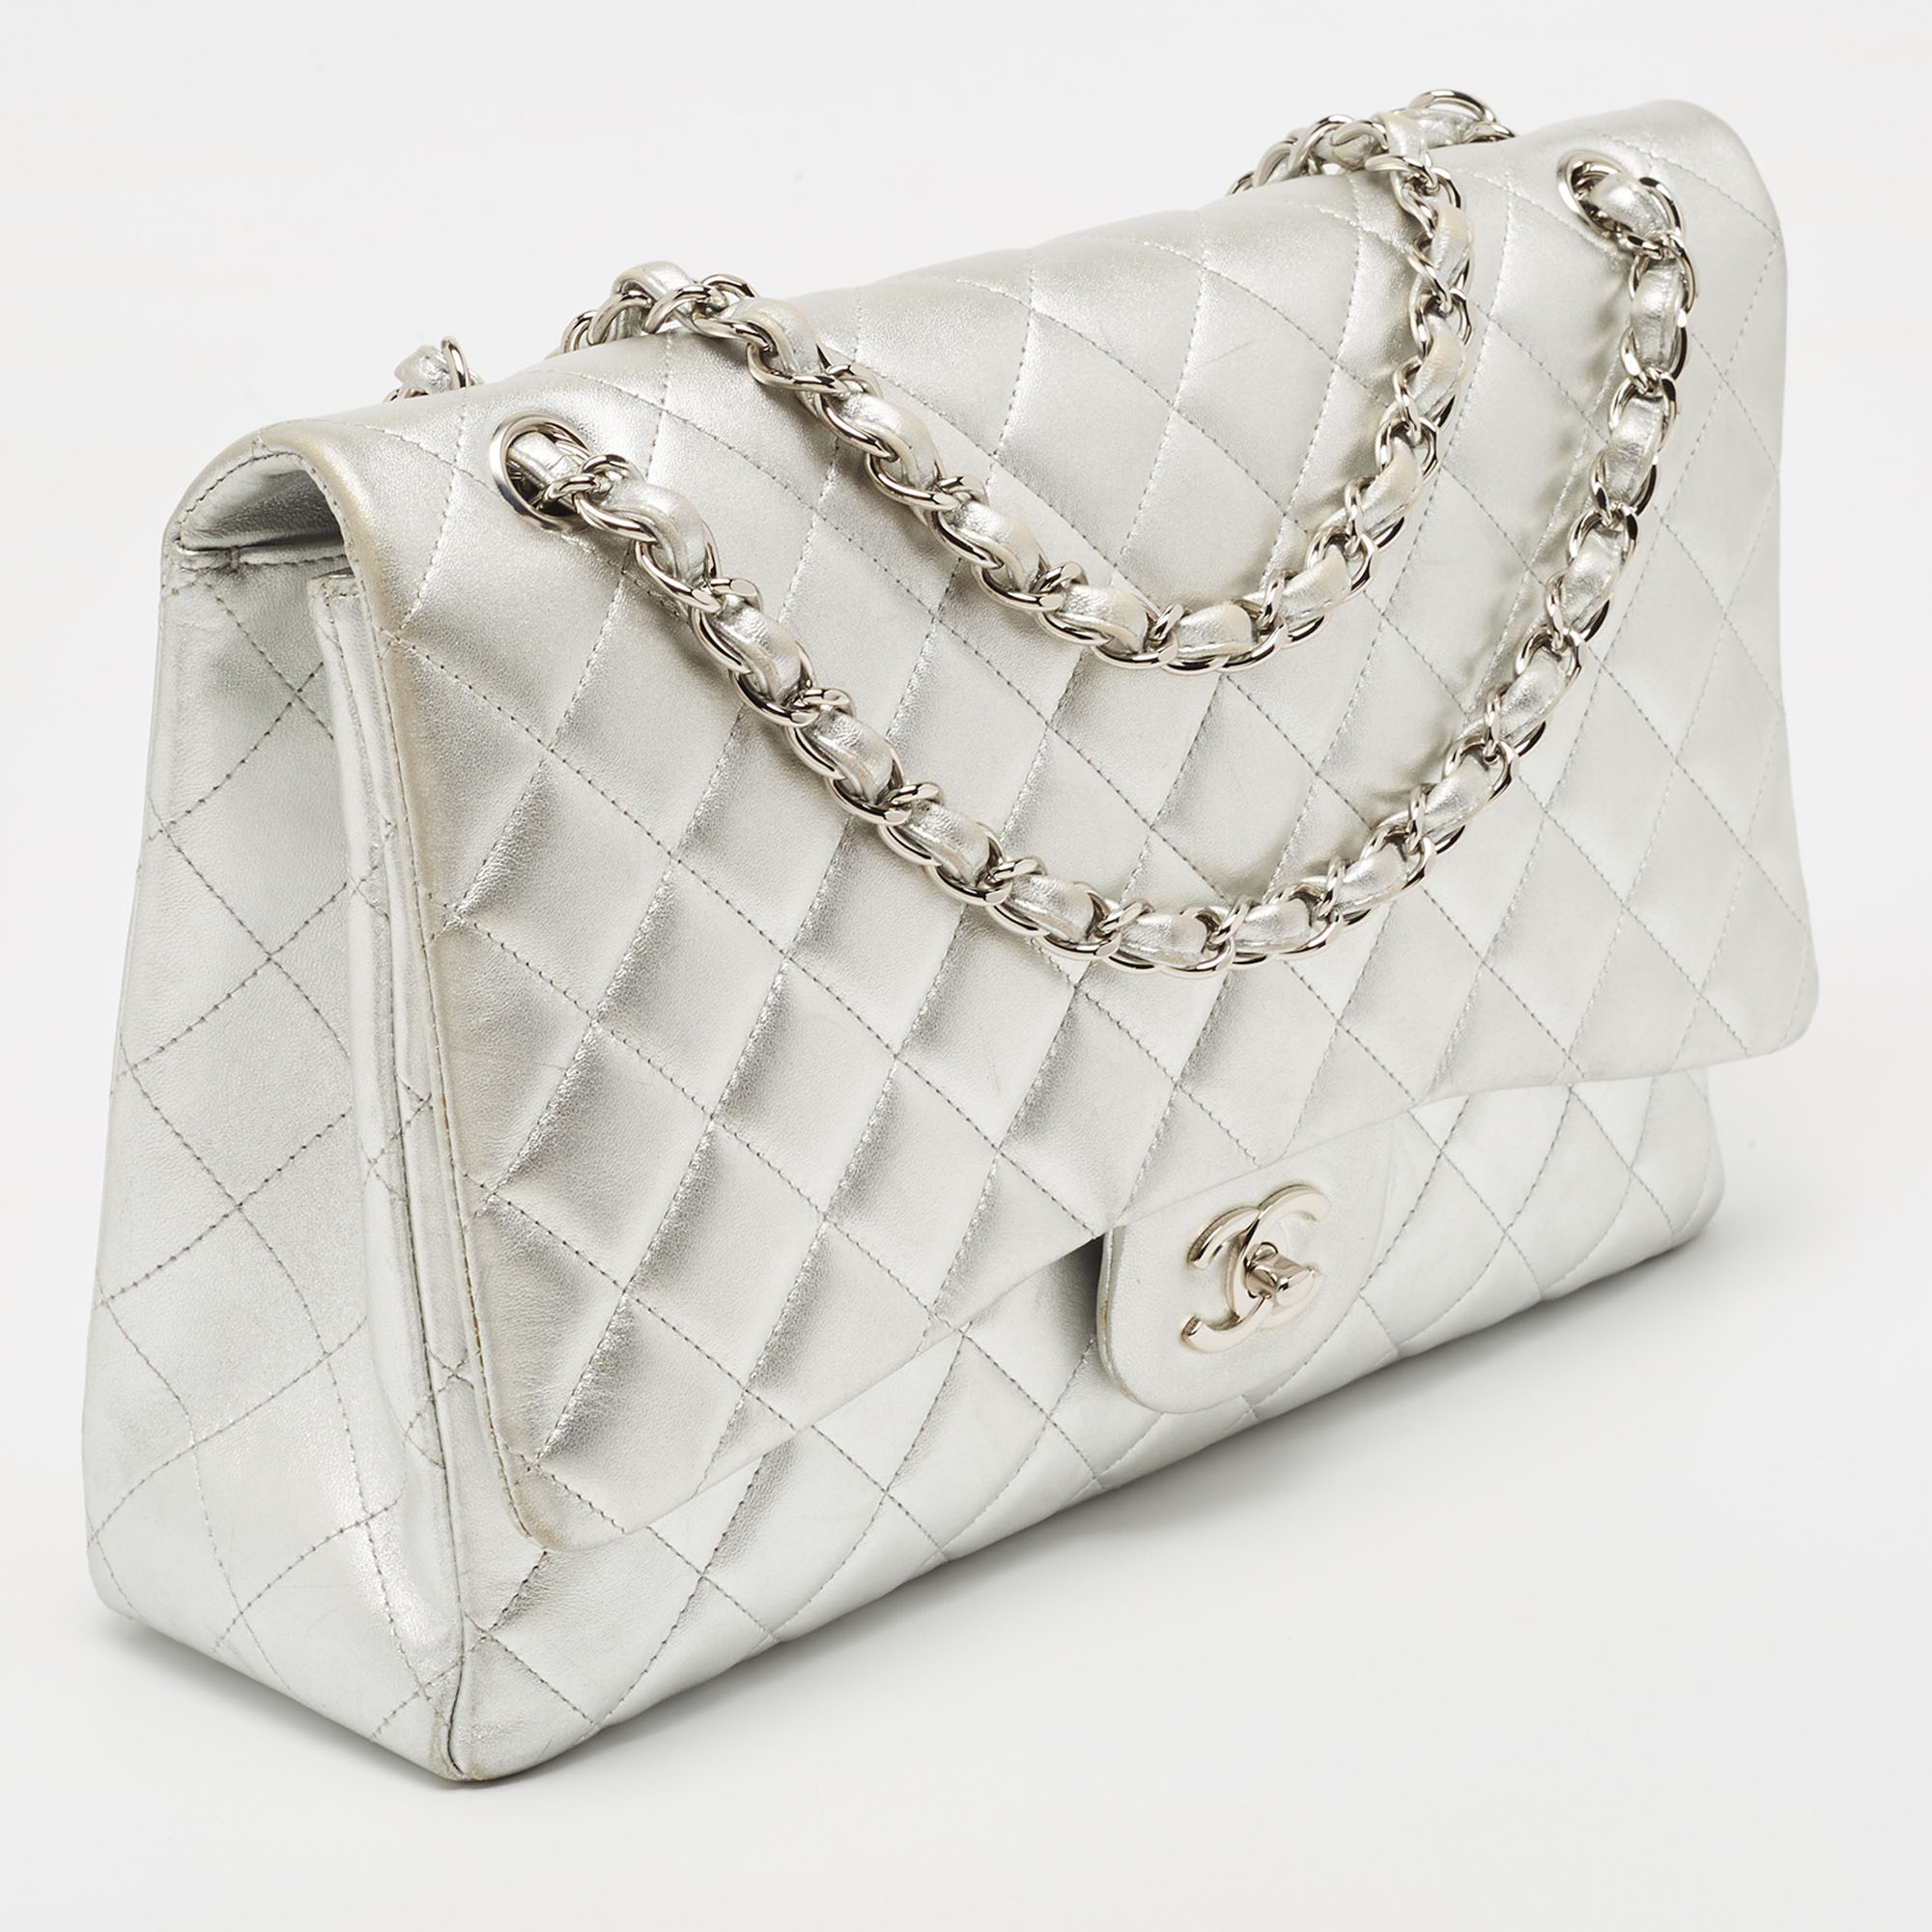 Chanel Silver Quilted Lambskin Leather Maxi Classic Single Flap Bag